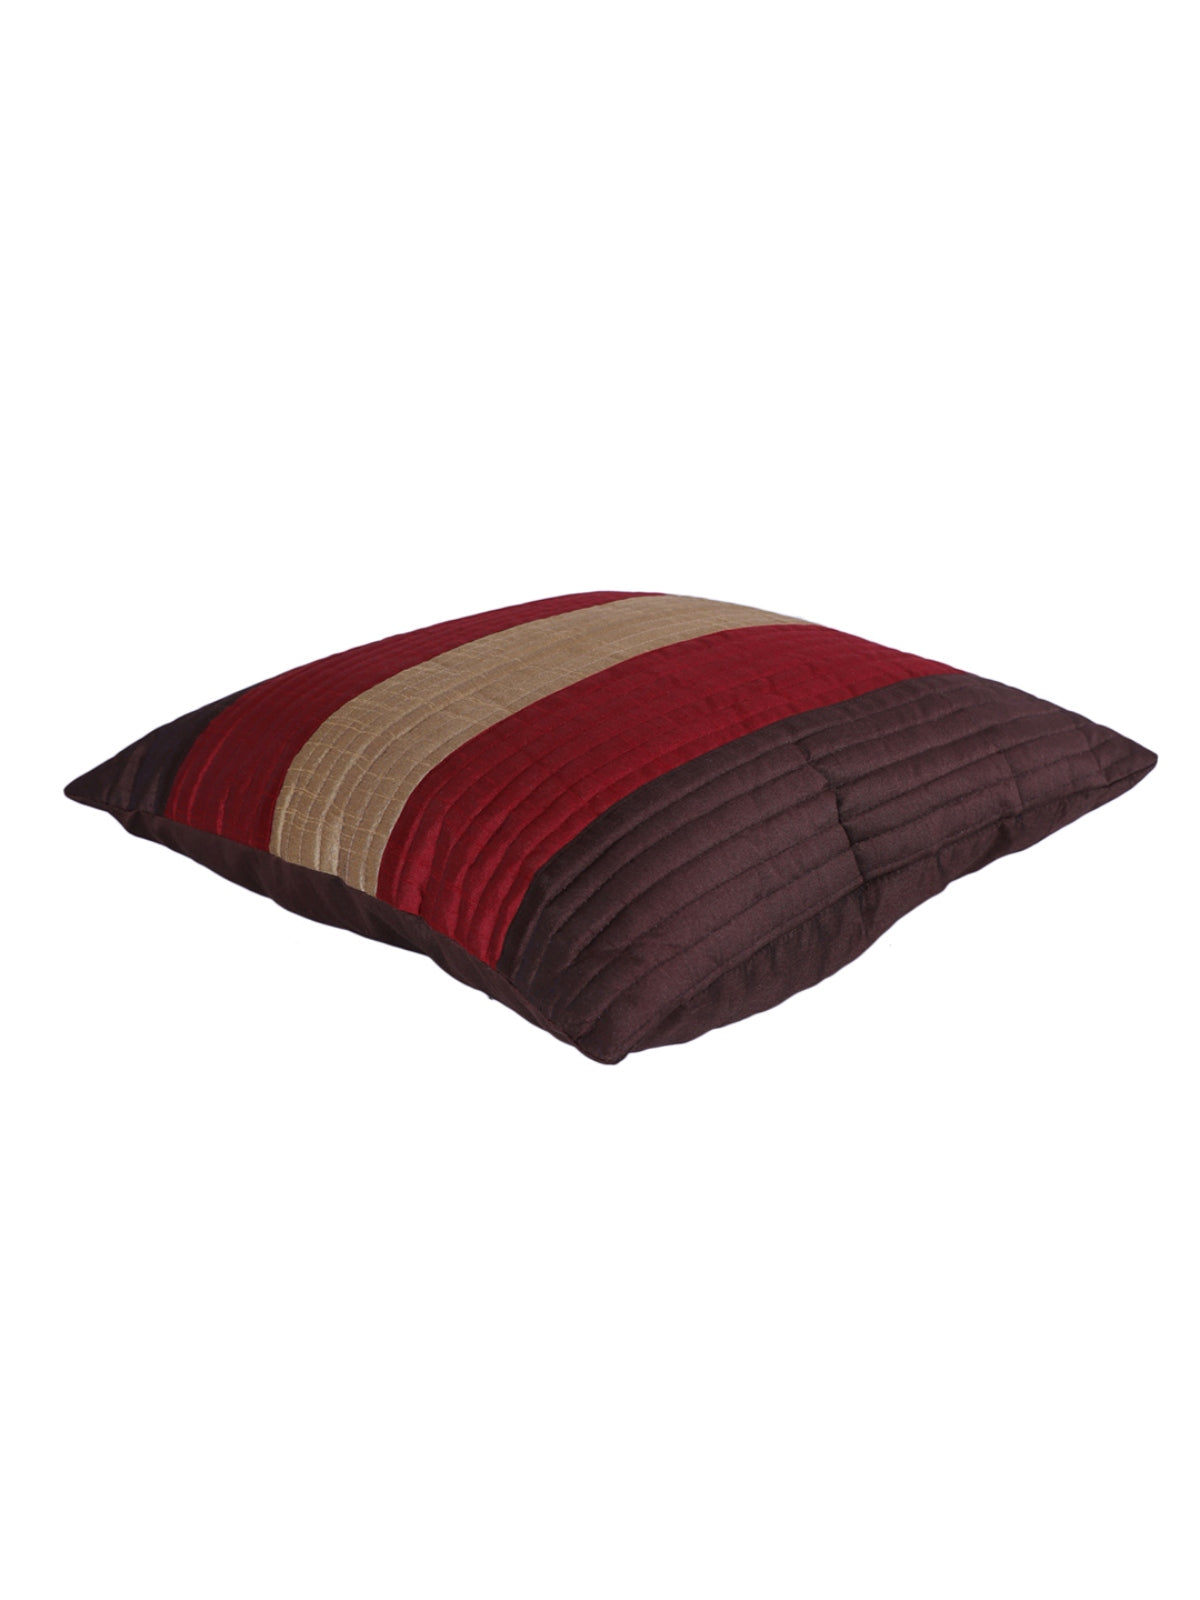 Striped Printed Polyester Cushion Cover Set of 5 - Brown & Maroon